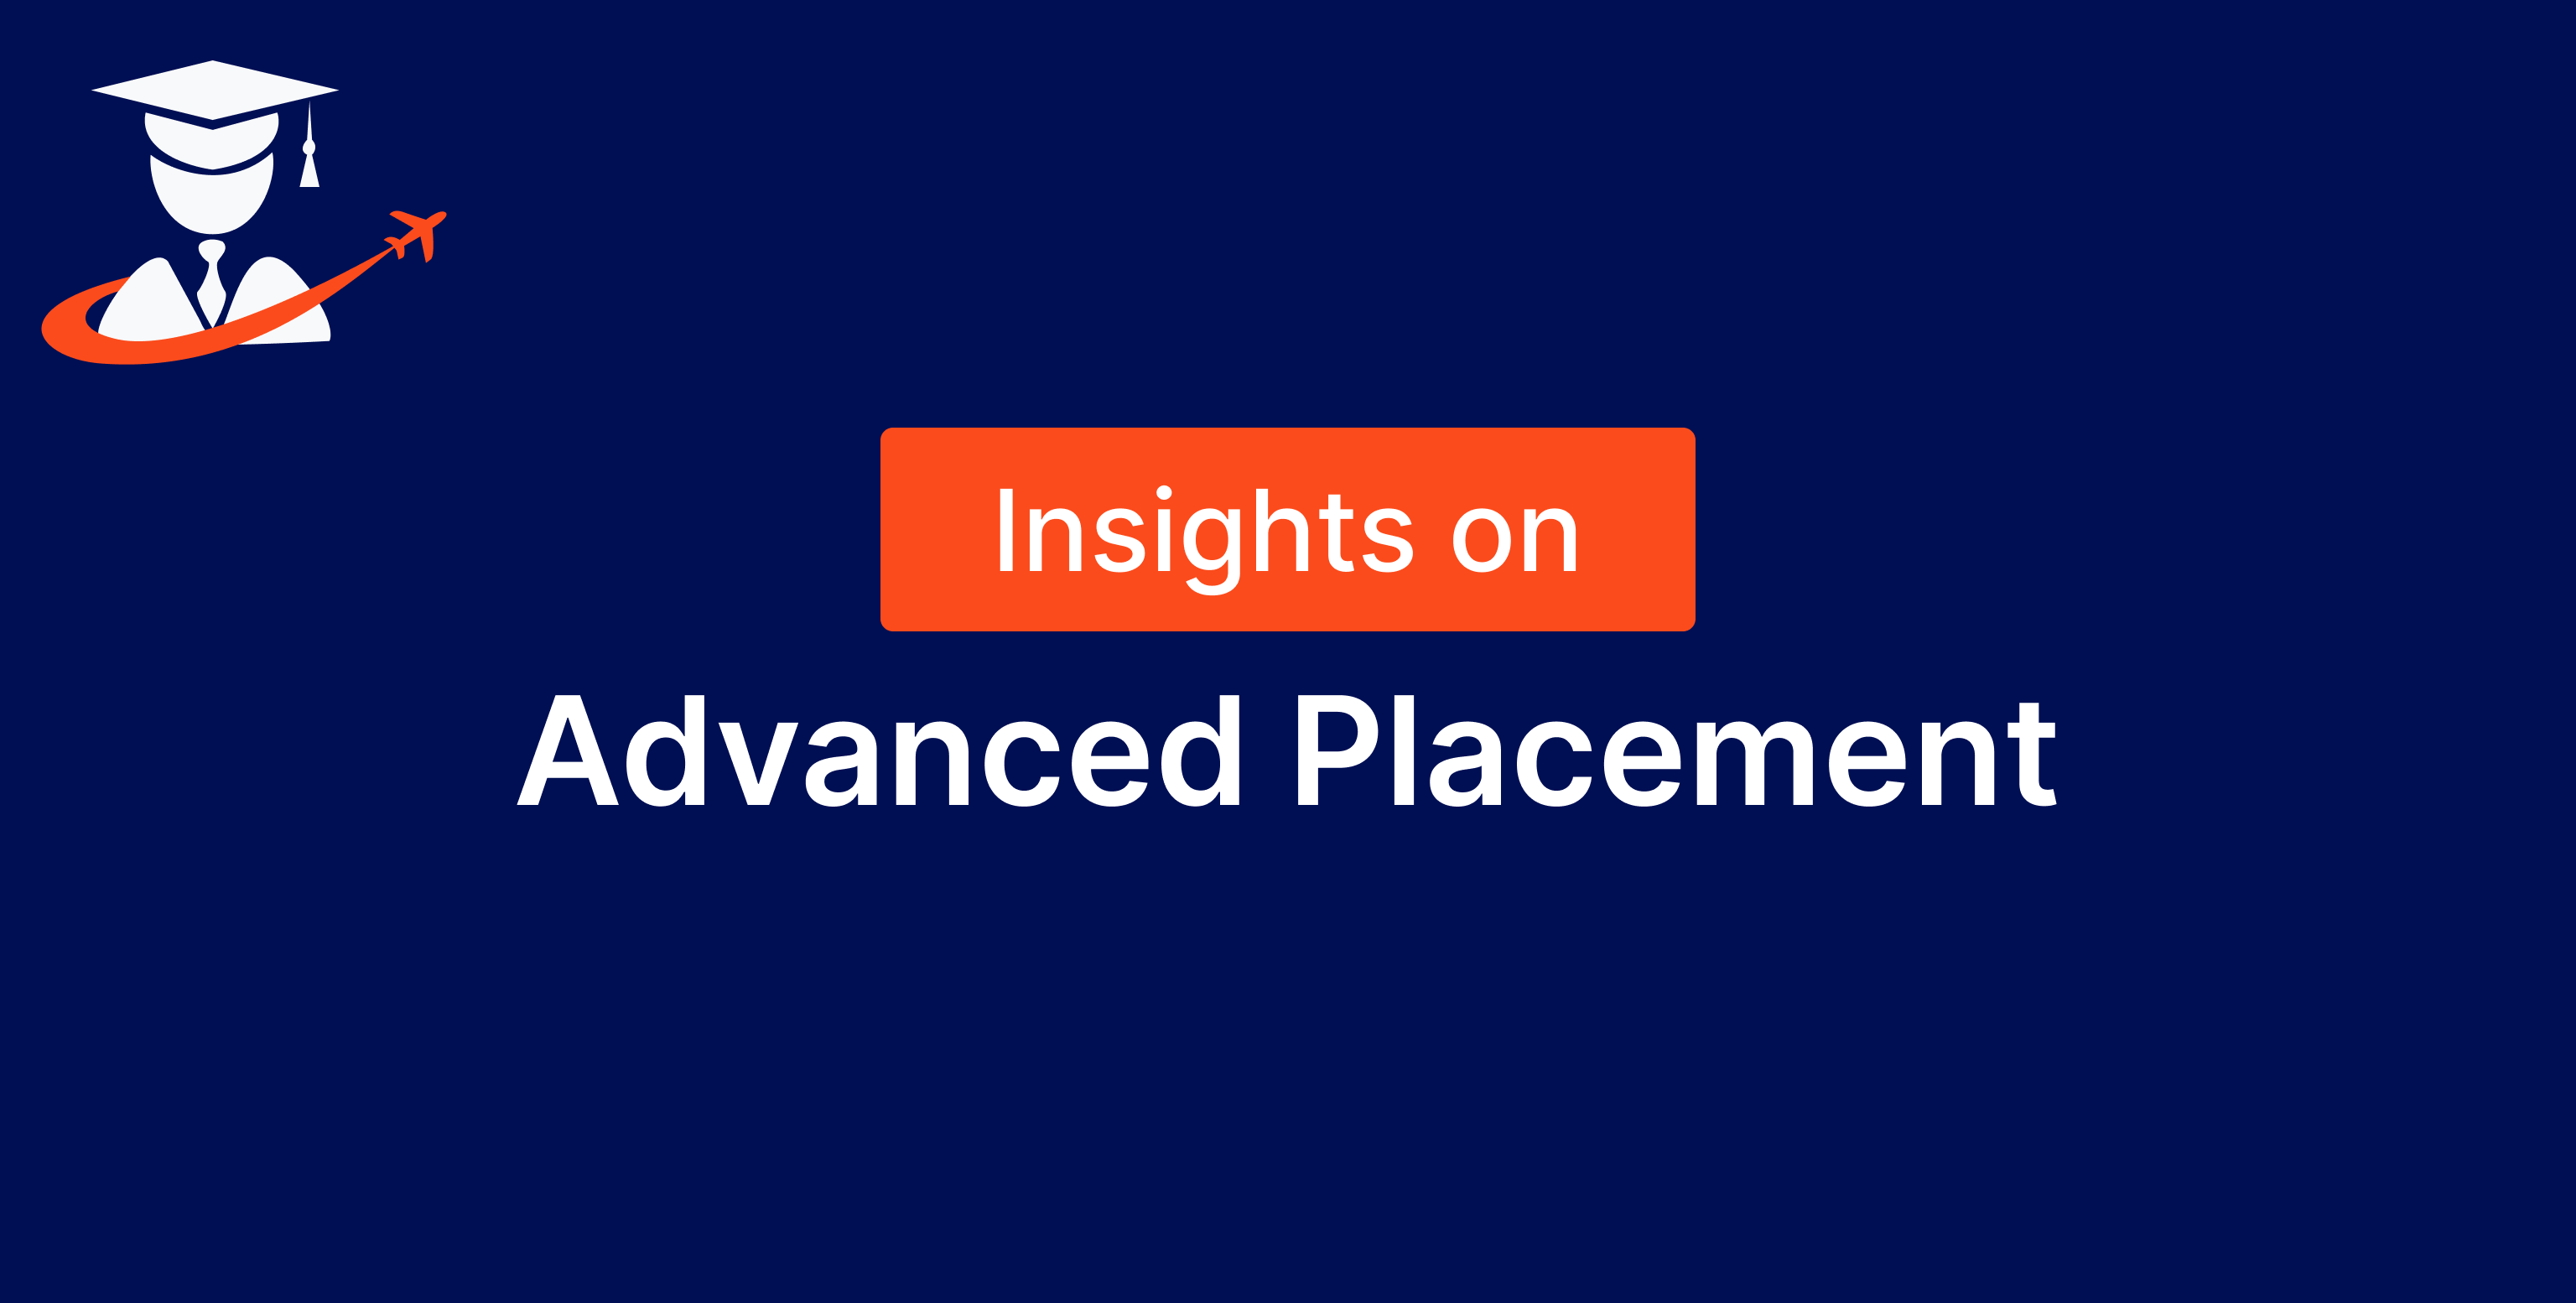 Advanced Placement Classes in India: Enhancing Education Opportunities